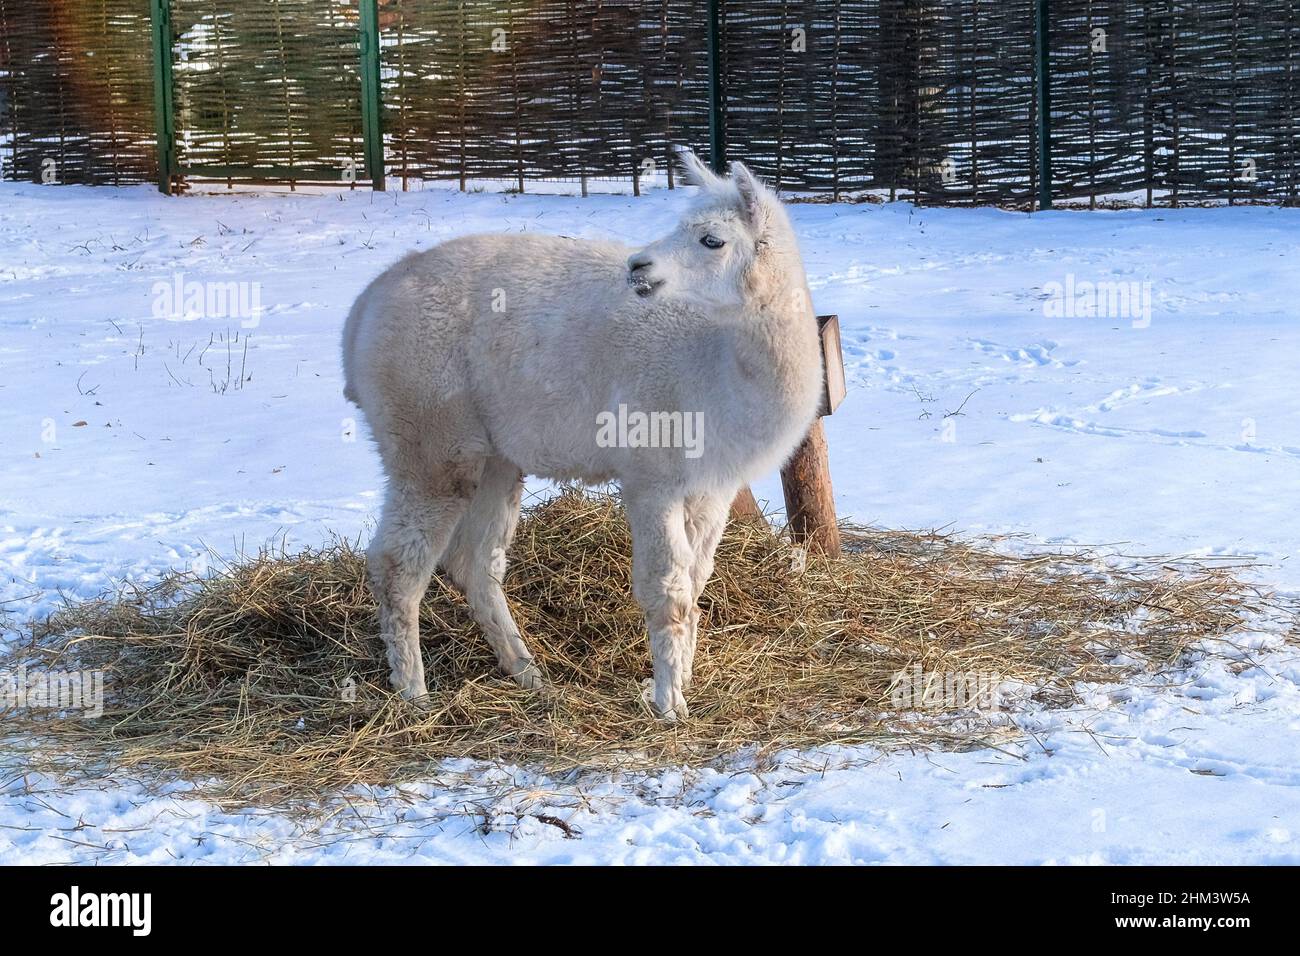 Lama eating hay at the zoo in winter, close up.  Keeping wild animals in zoological parks. Stock Photo